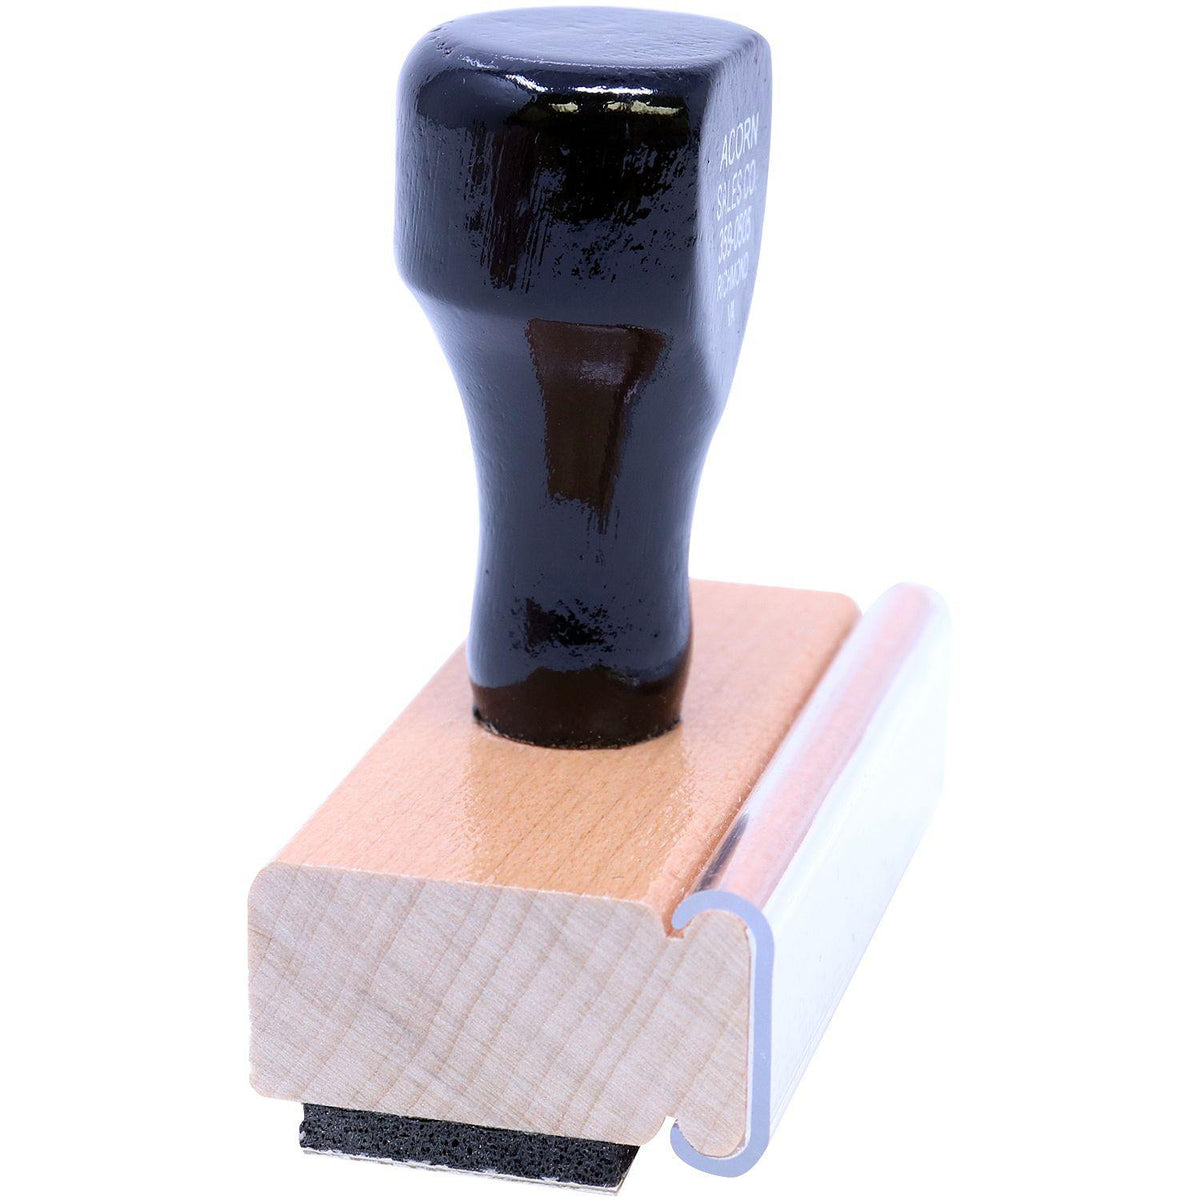 Side View of Large File Copy Rubber Stamp at an Angle